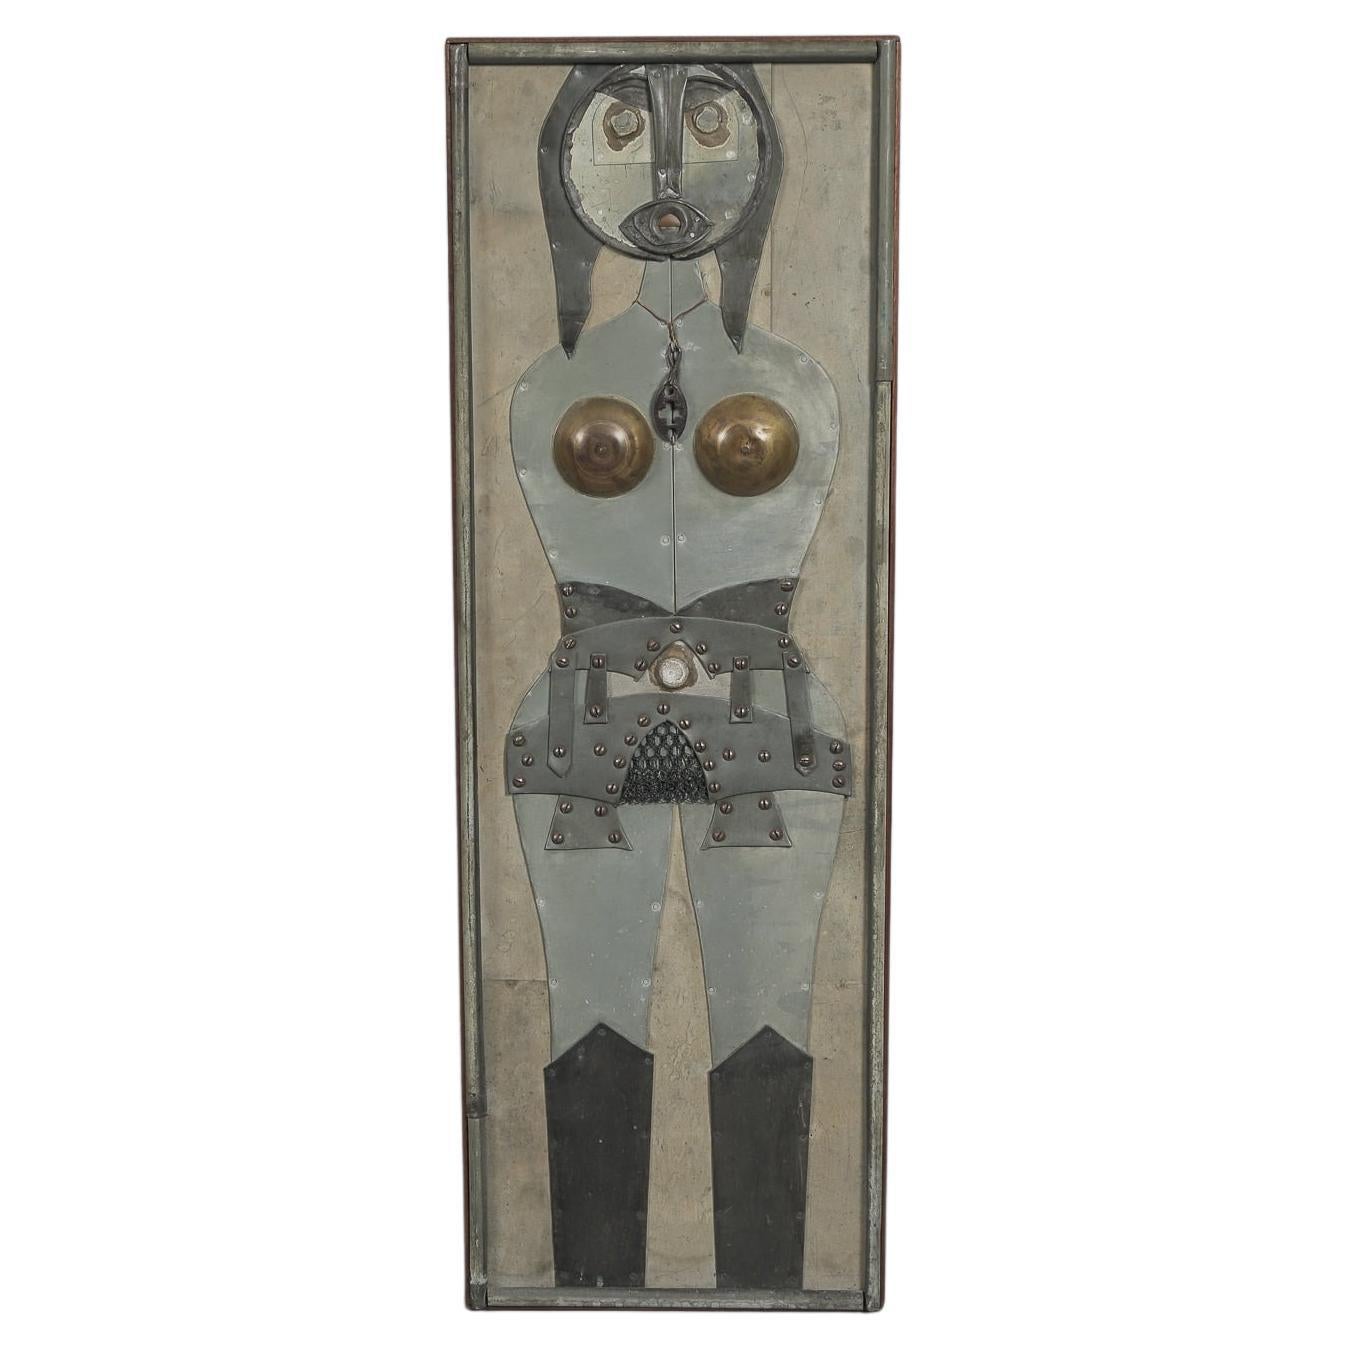 Brutalist Erotic 3D Wall Picture in Metal from the Artist F. Michel, 1973 For Sale